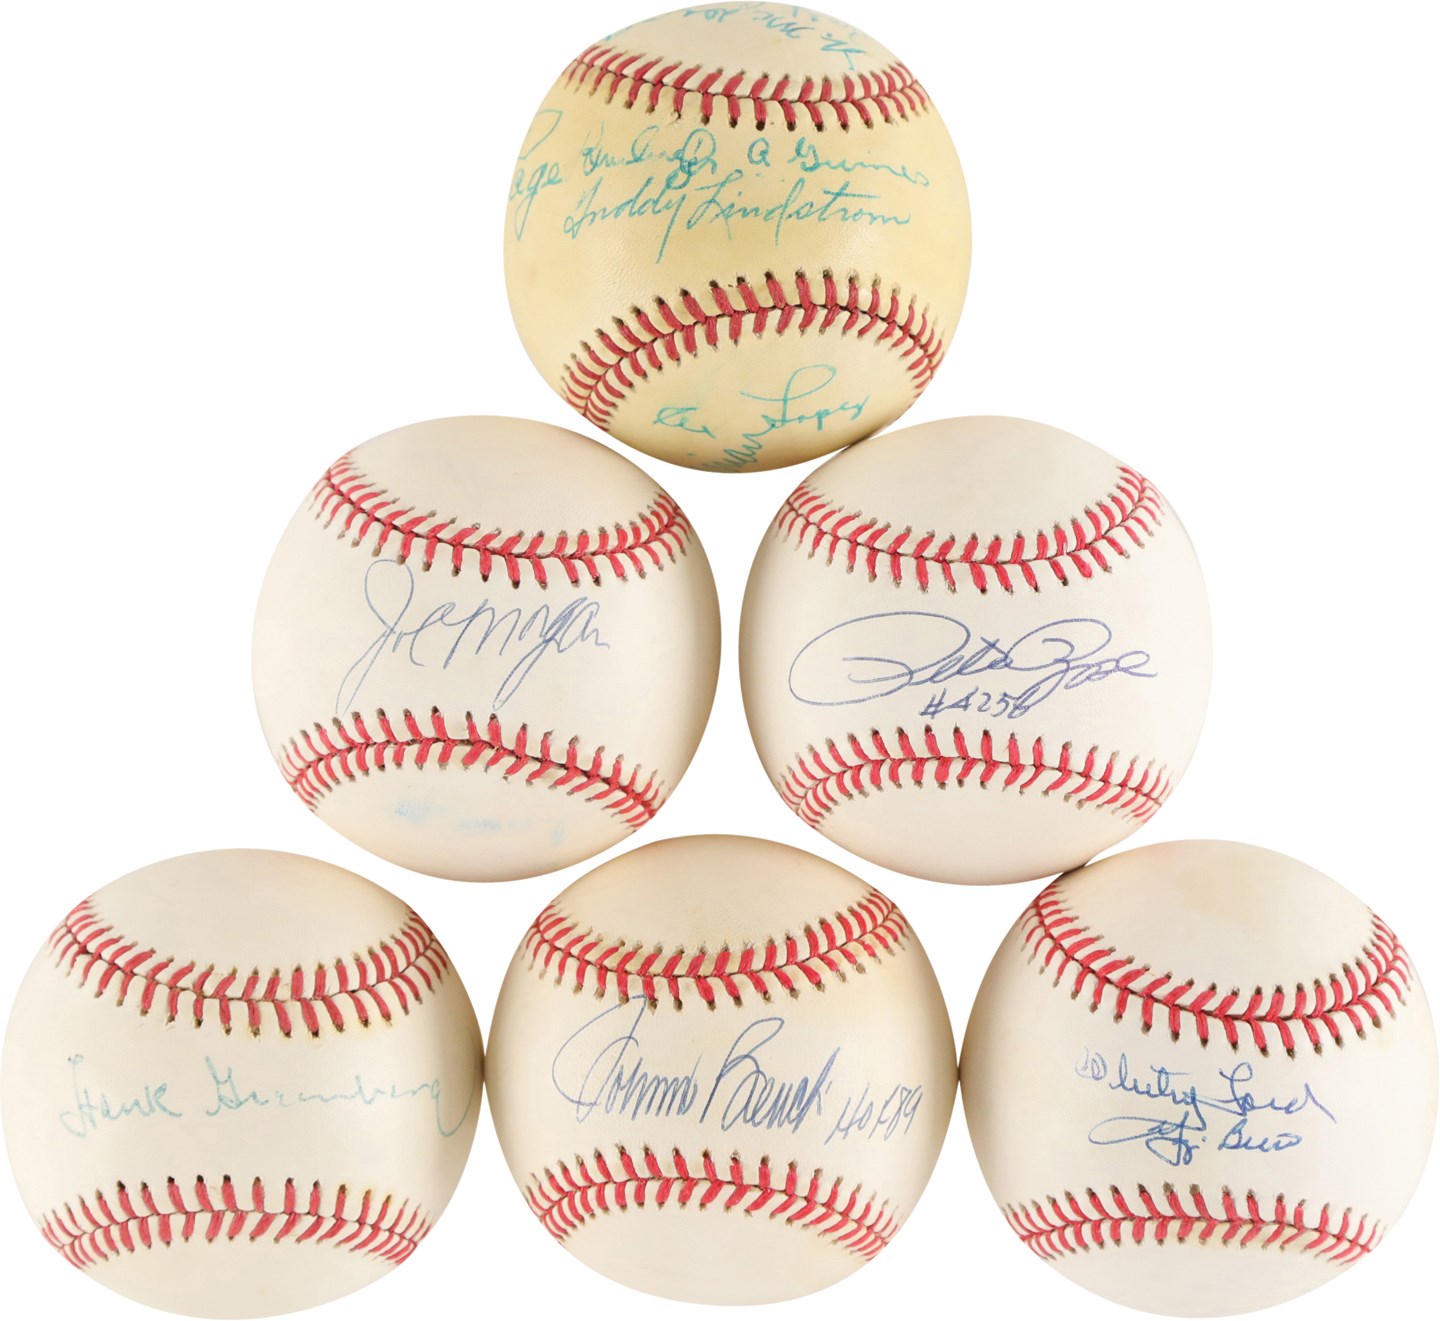 Hall of Famers & Stars Signed Baseball Collection (89)